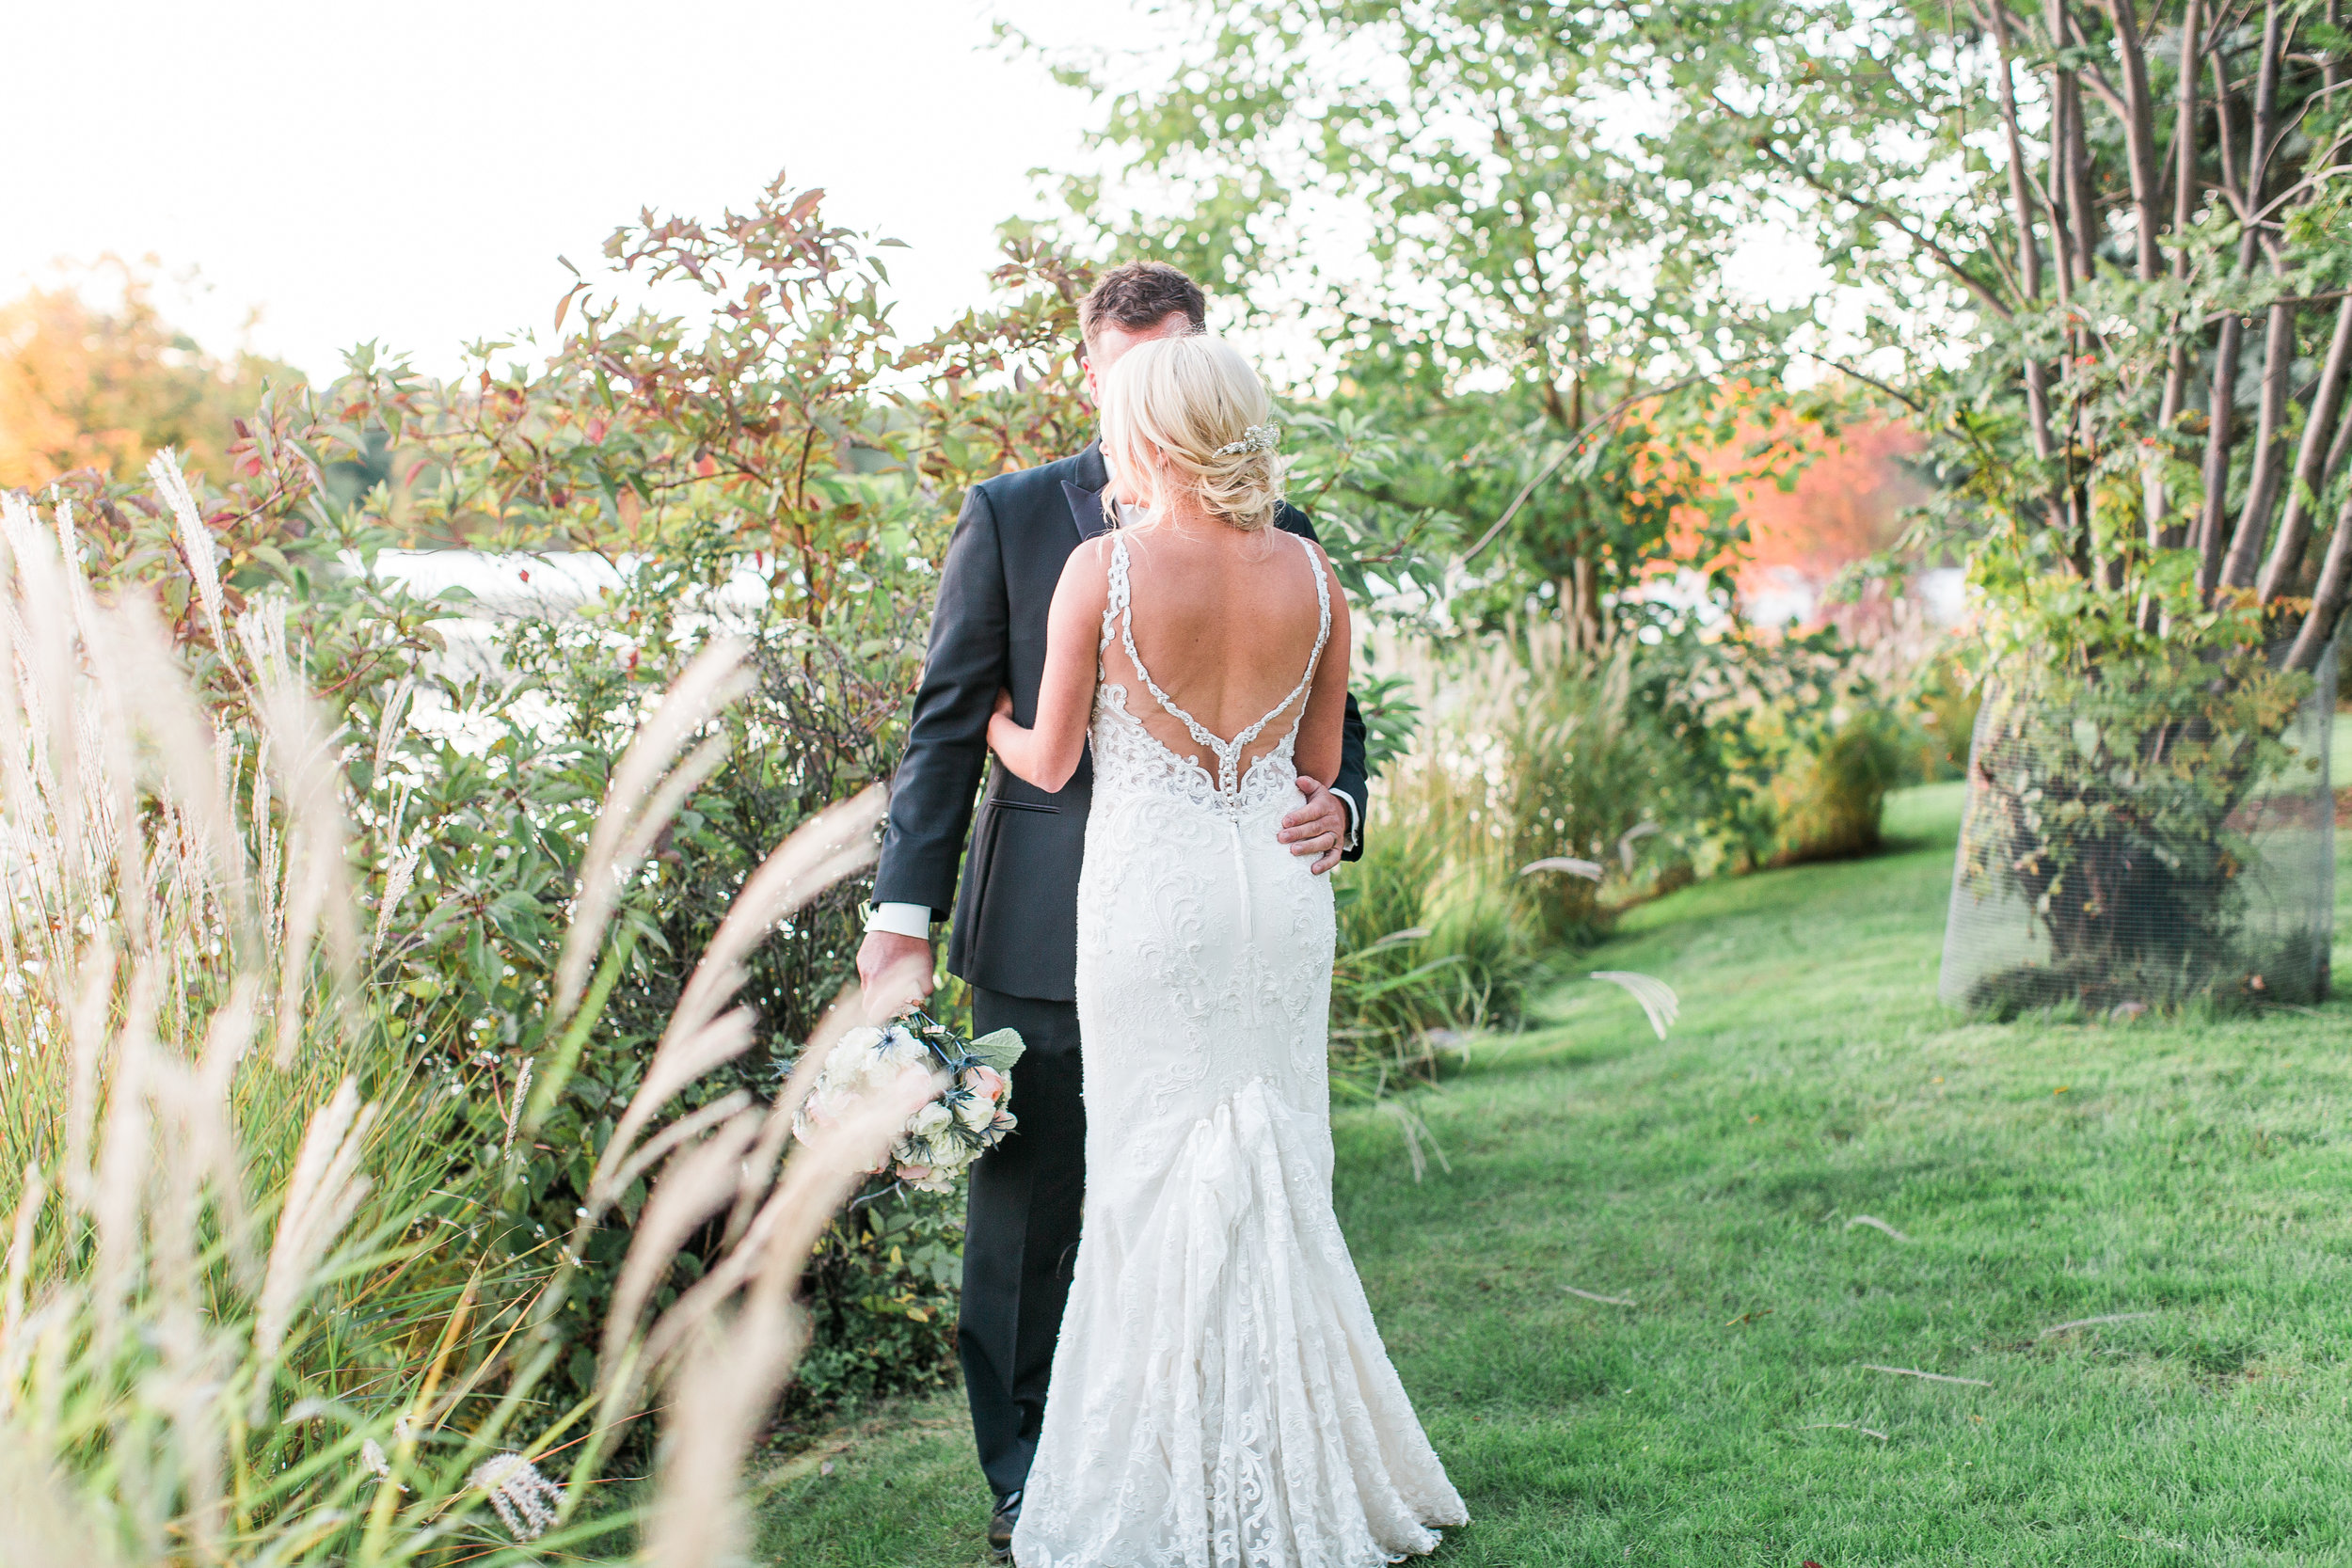 Charthouse Lakeville Minnesota wedding bride and groom at sunset back of dress detail Minnesota wedding photography Mallory Kiesow Photography